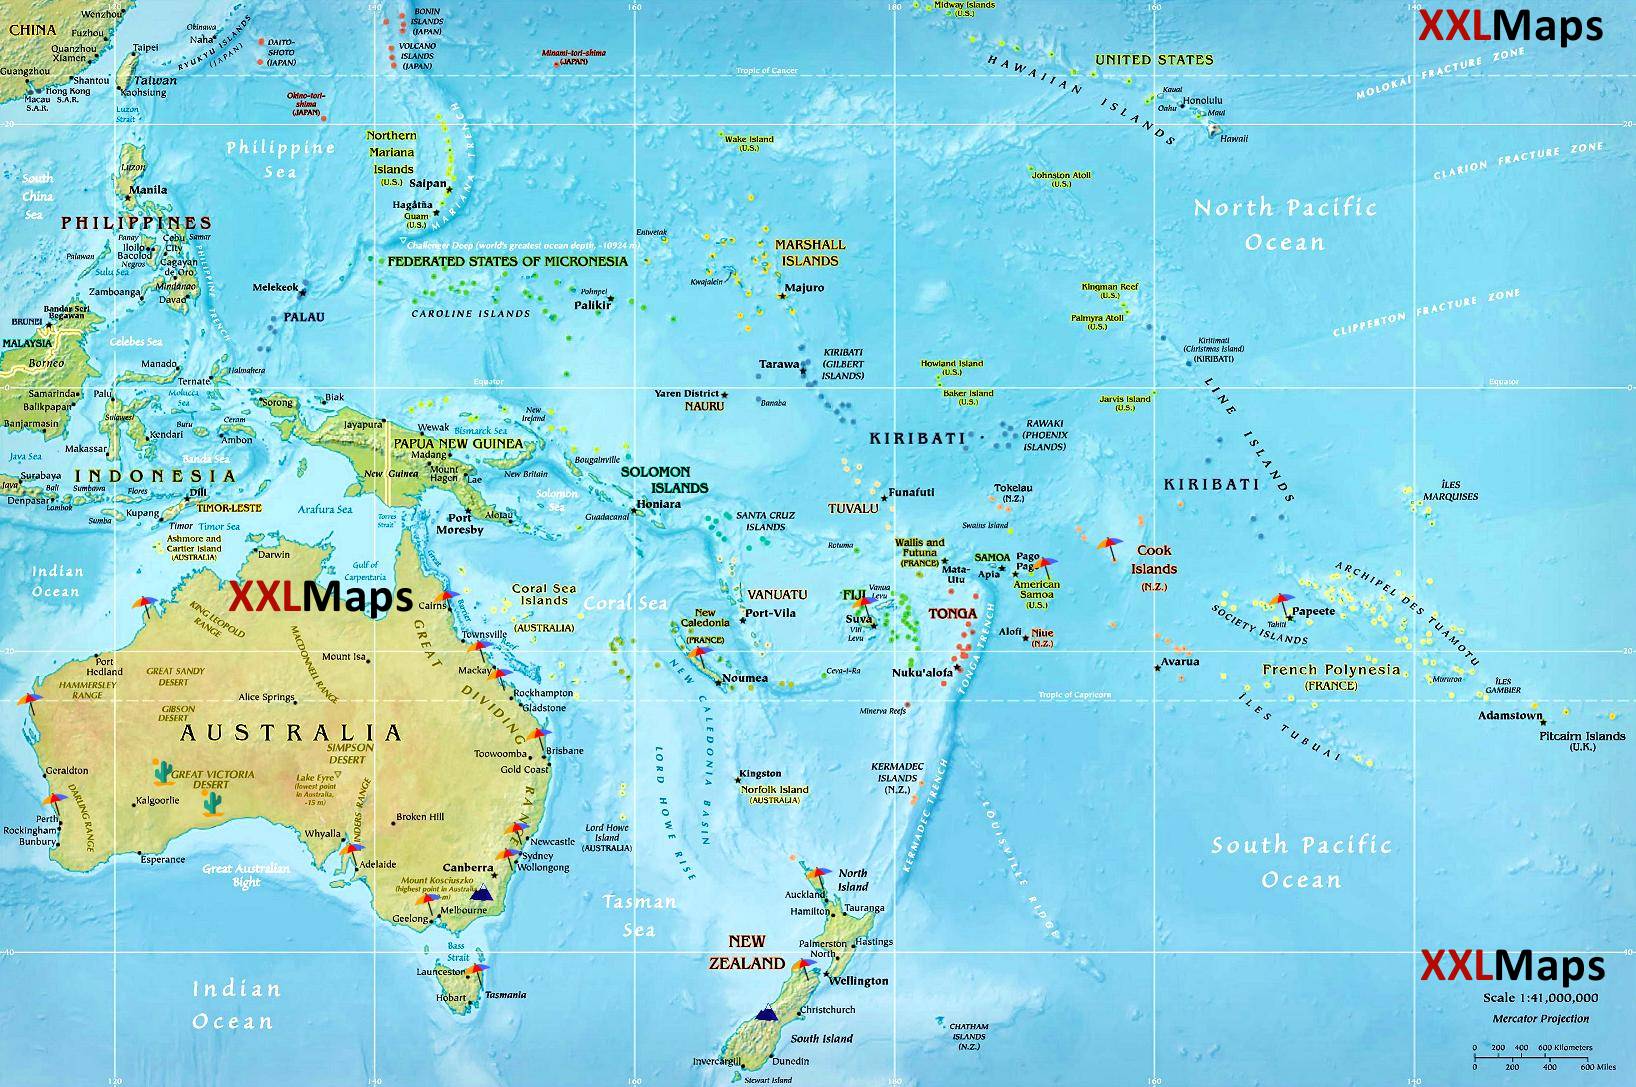 Physical map of Australia & Pacific